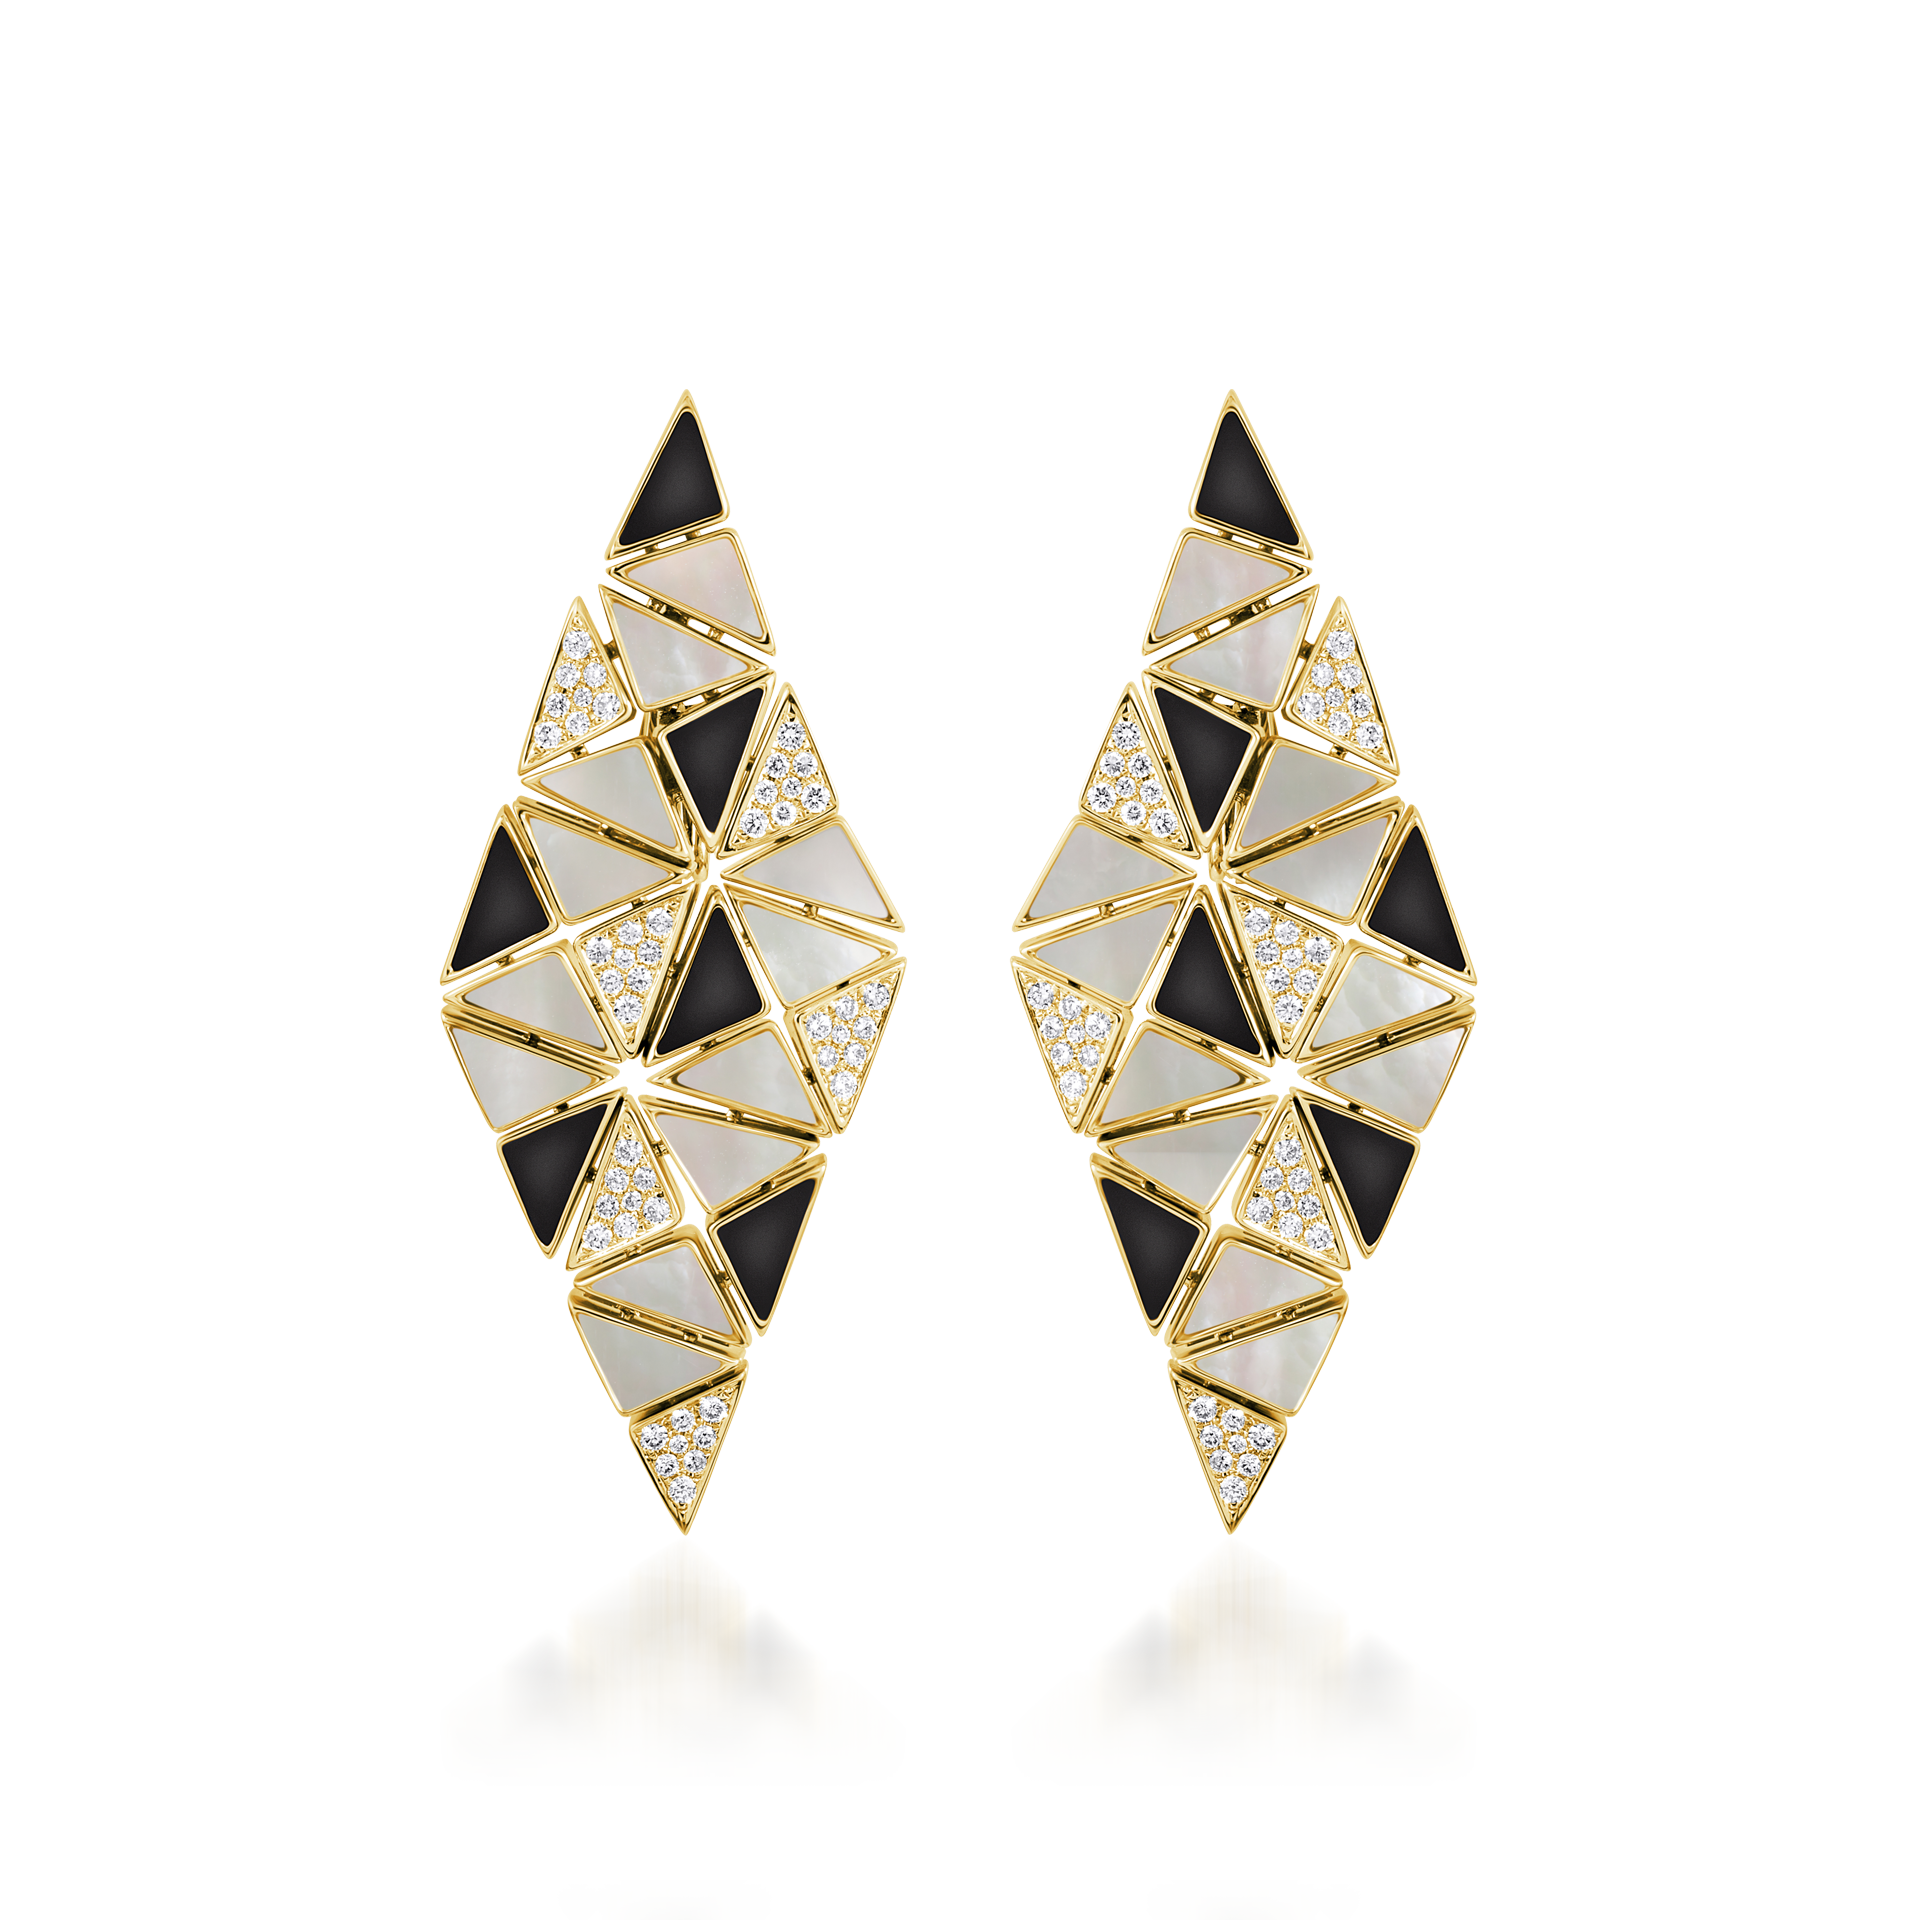 Deco Cinch Earrings with Black Agate, White Mother of Pearl and Diamonds In 18K Yellow Gold